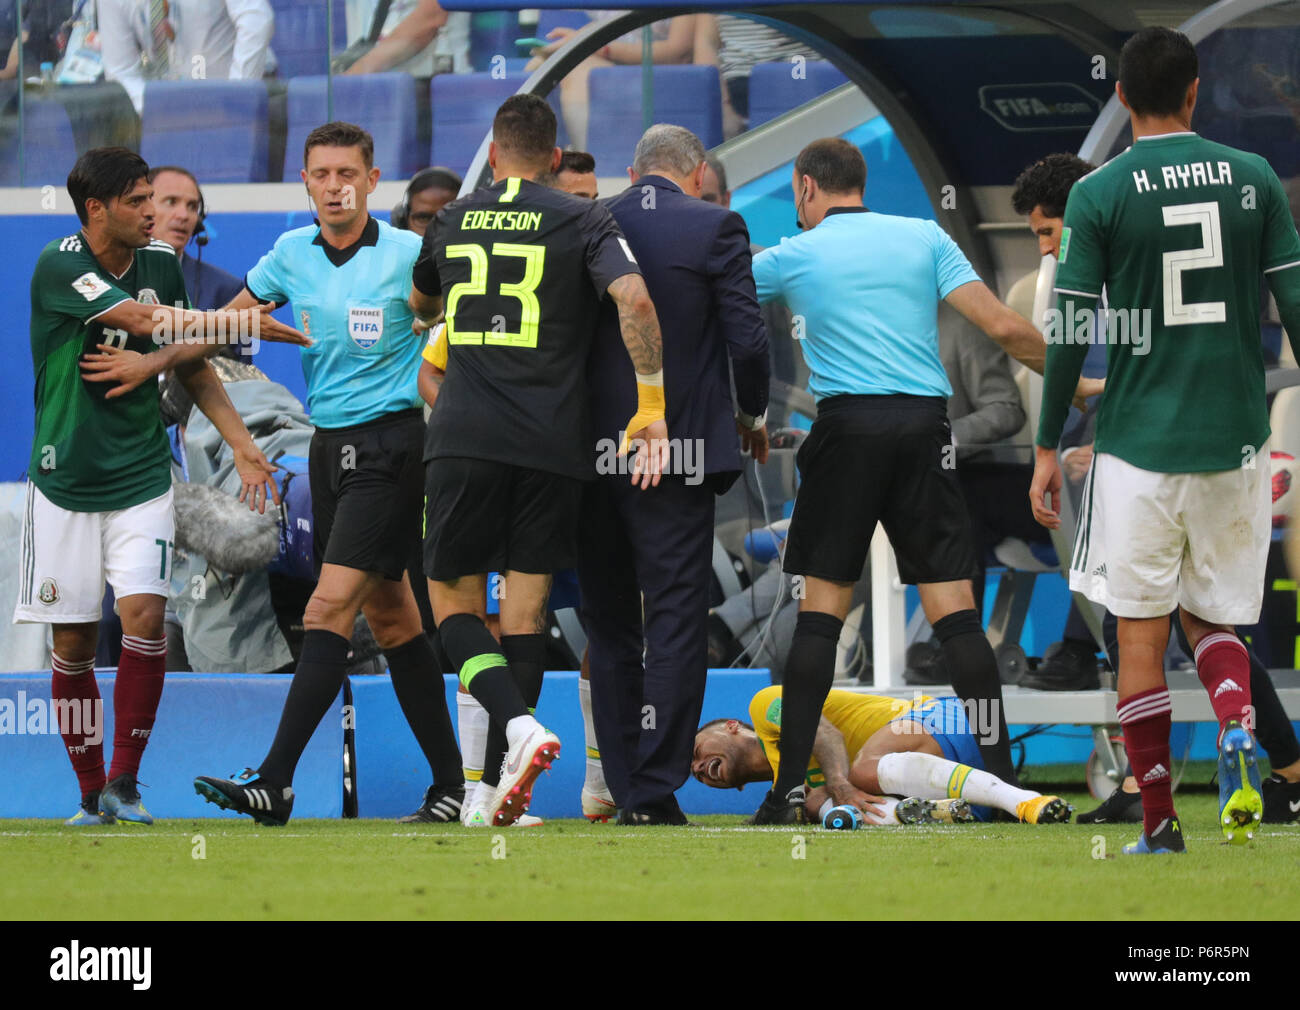 Samara, Russia. 02nd July, 2018. Soccer, World Cup 2018, Final round - round of 16: Mexico vs. Brazil at the Samara stadium: Brazil's Neymar lying injured on the floor after a foul while match referee from Italy Gianluca Rocchi (2nd from left) walks between the players. Credit: Christian Charisius/dpa/Alamy Live News Stock Photo